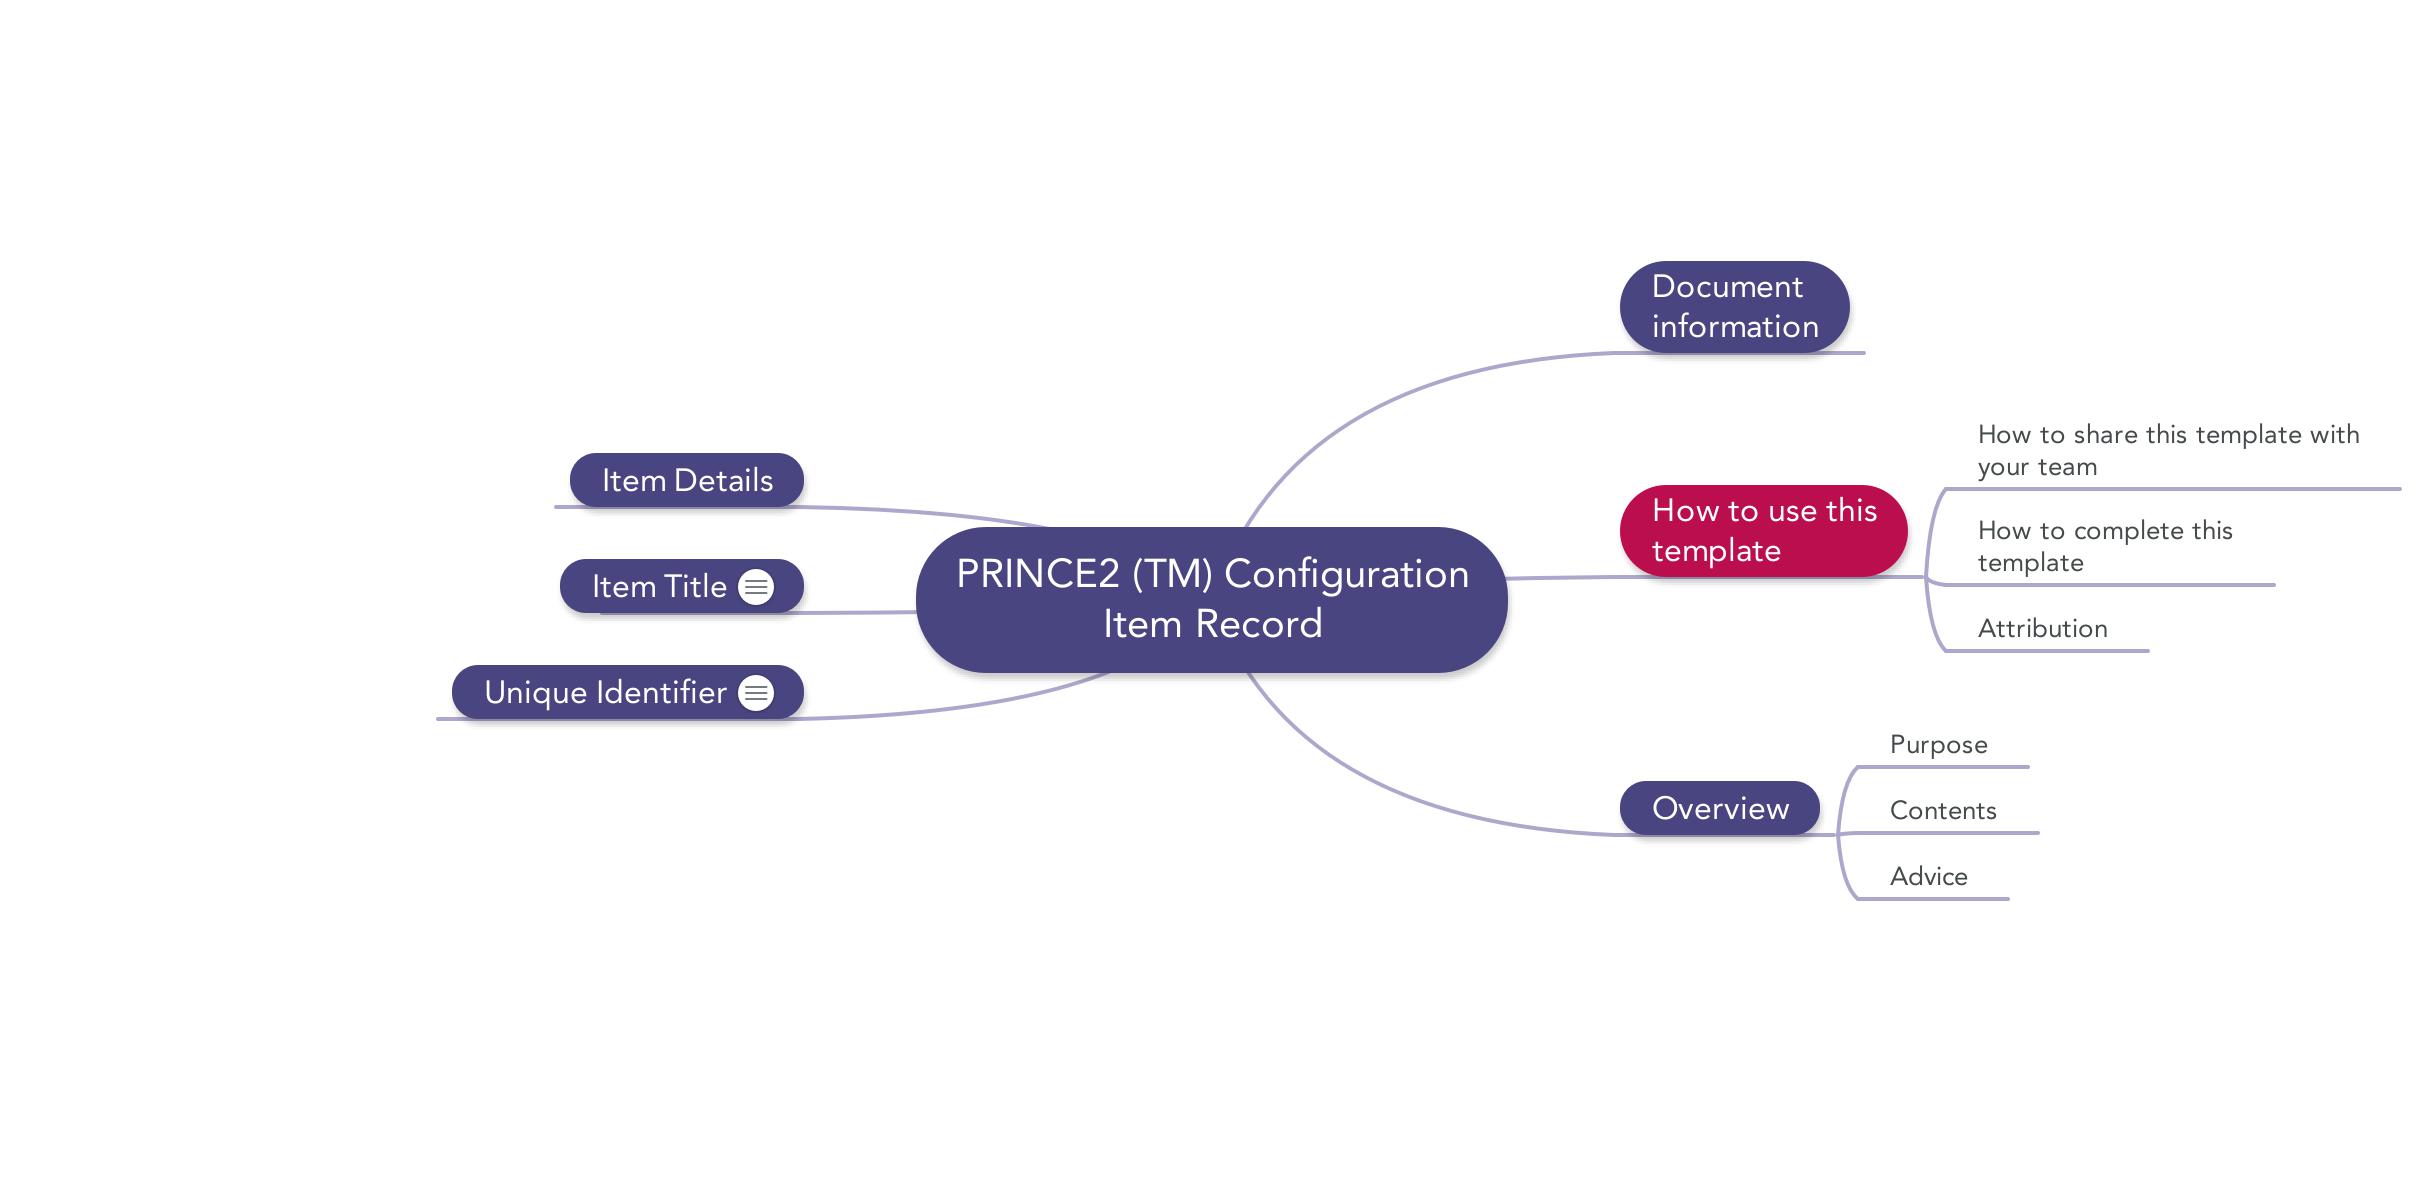 image of prince2 mindmap configuration item record template